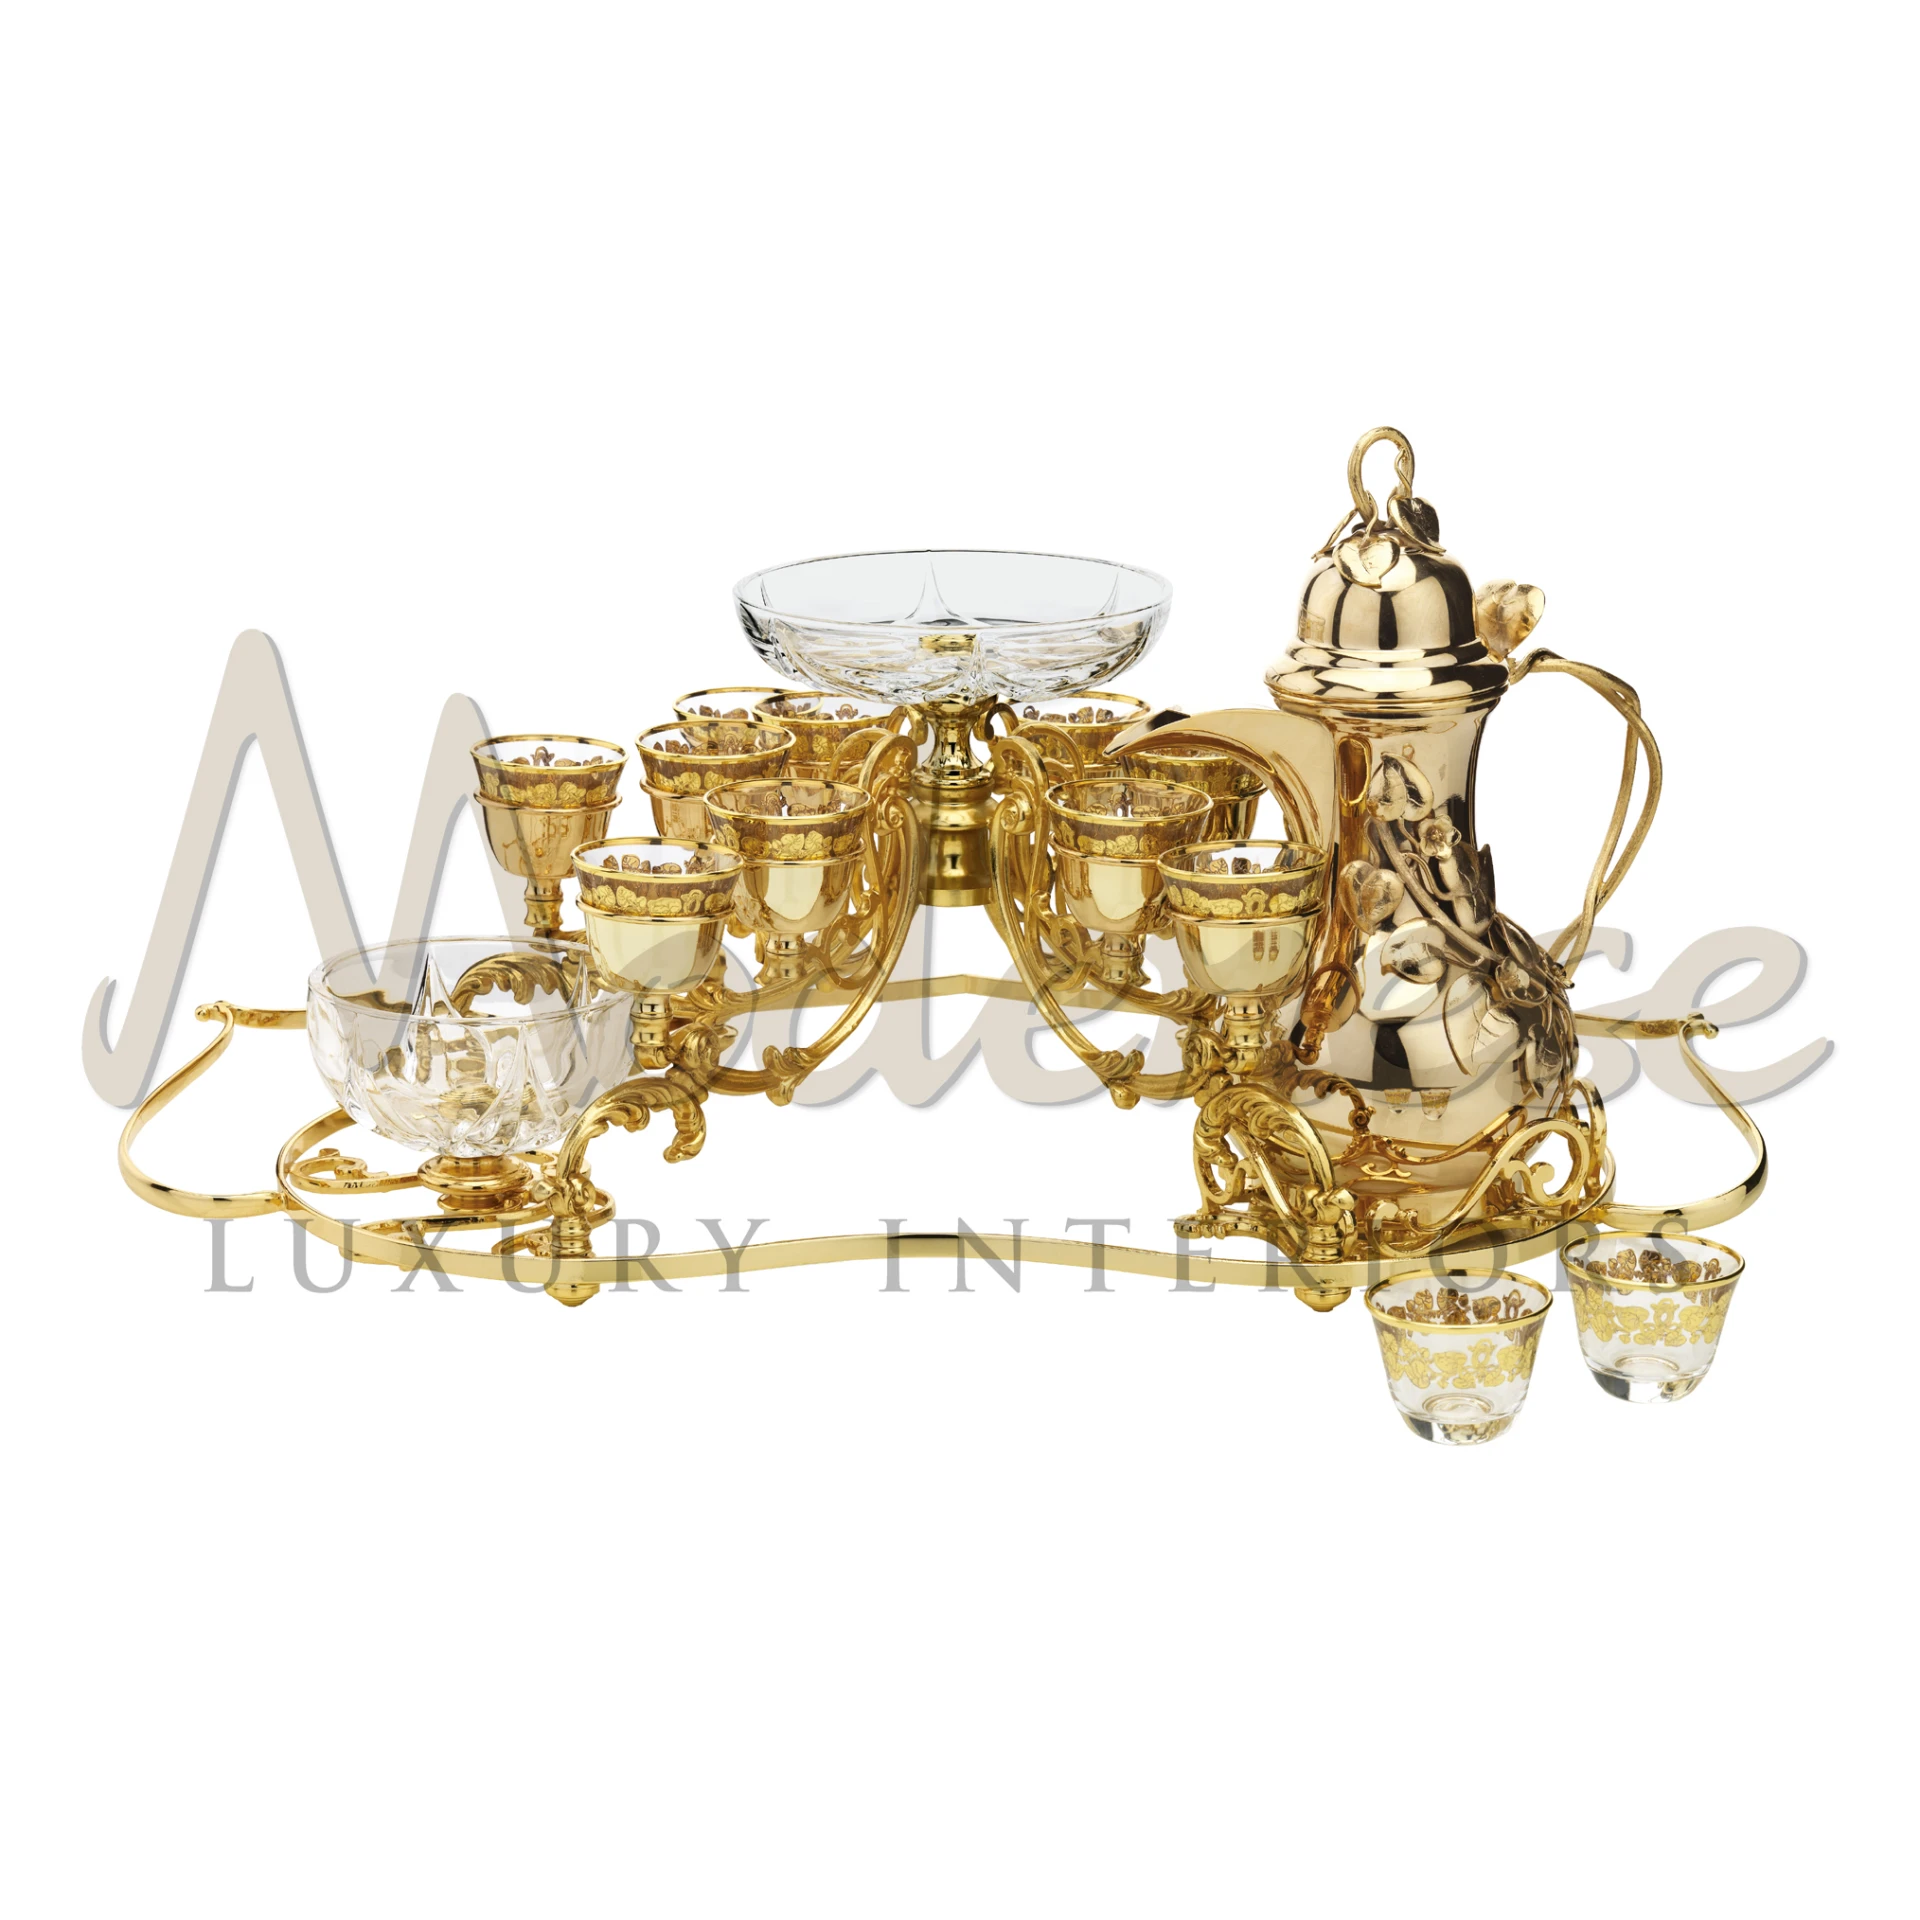 Elegant Coffee Tray with Pot and Cups in Gold”